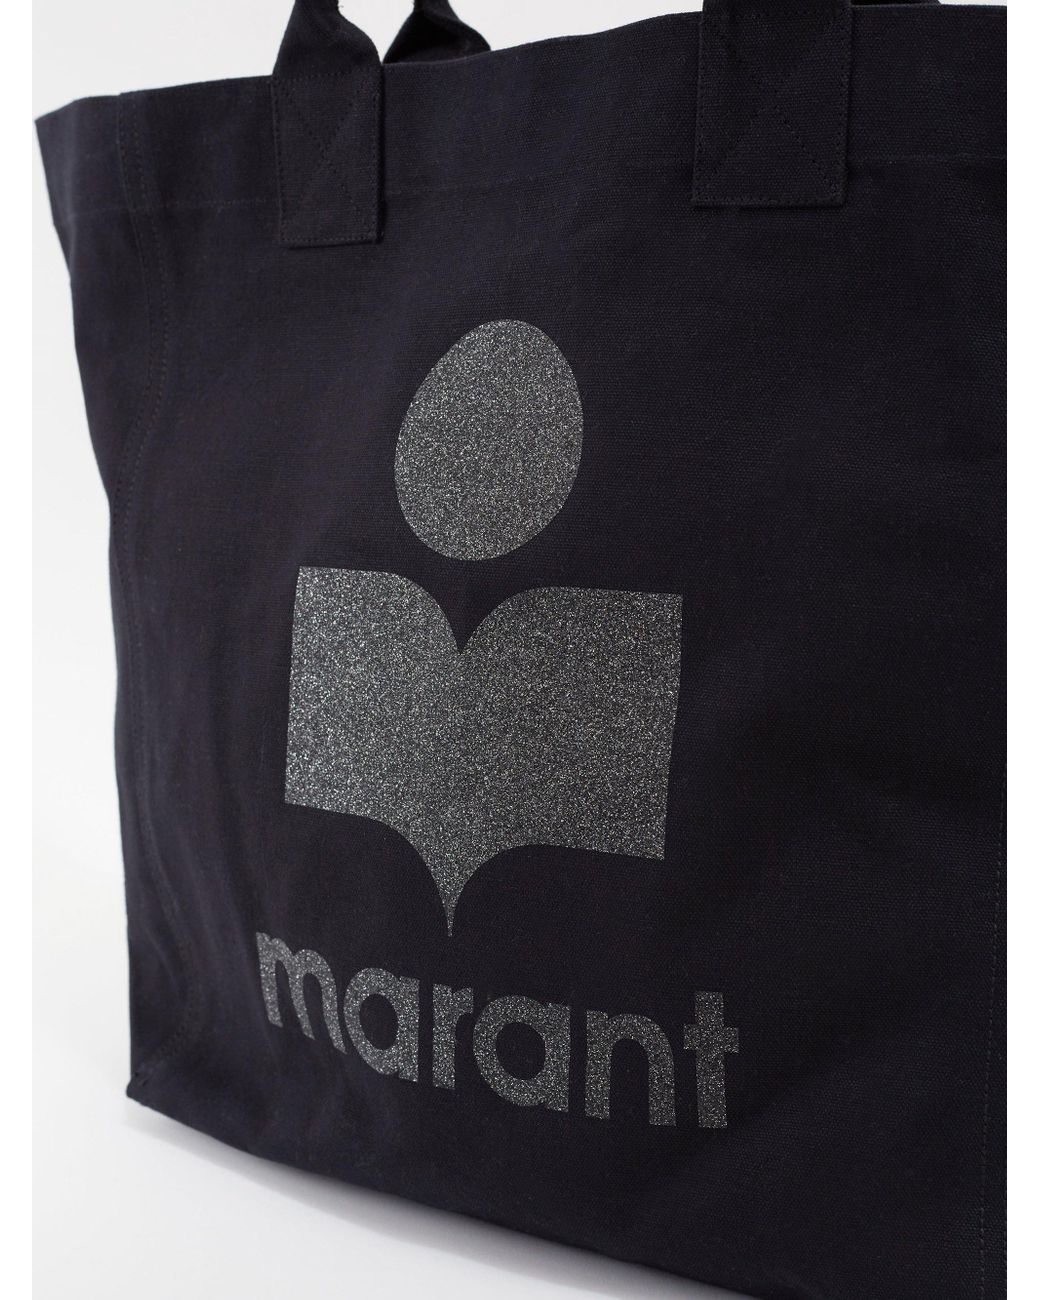 Isabel Marant Yenky Glitter-logo Cotton-canvas Tote Bag in Black | Lyst